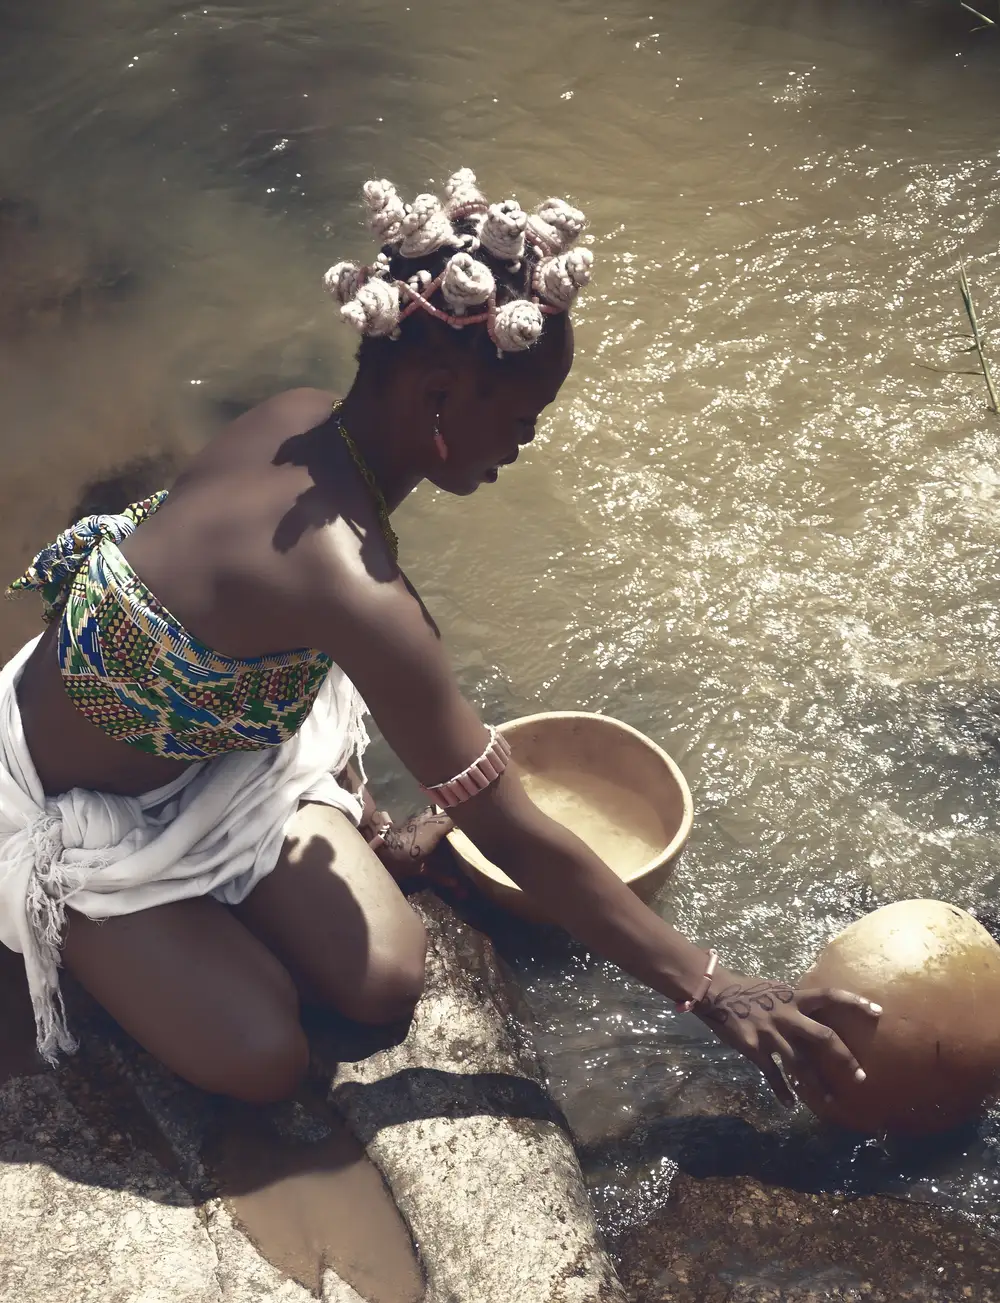 Girl fetching water from a river